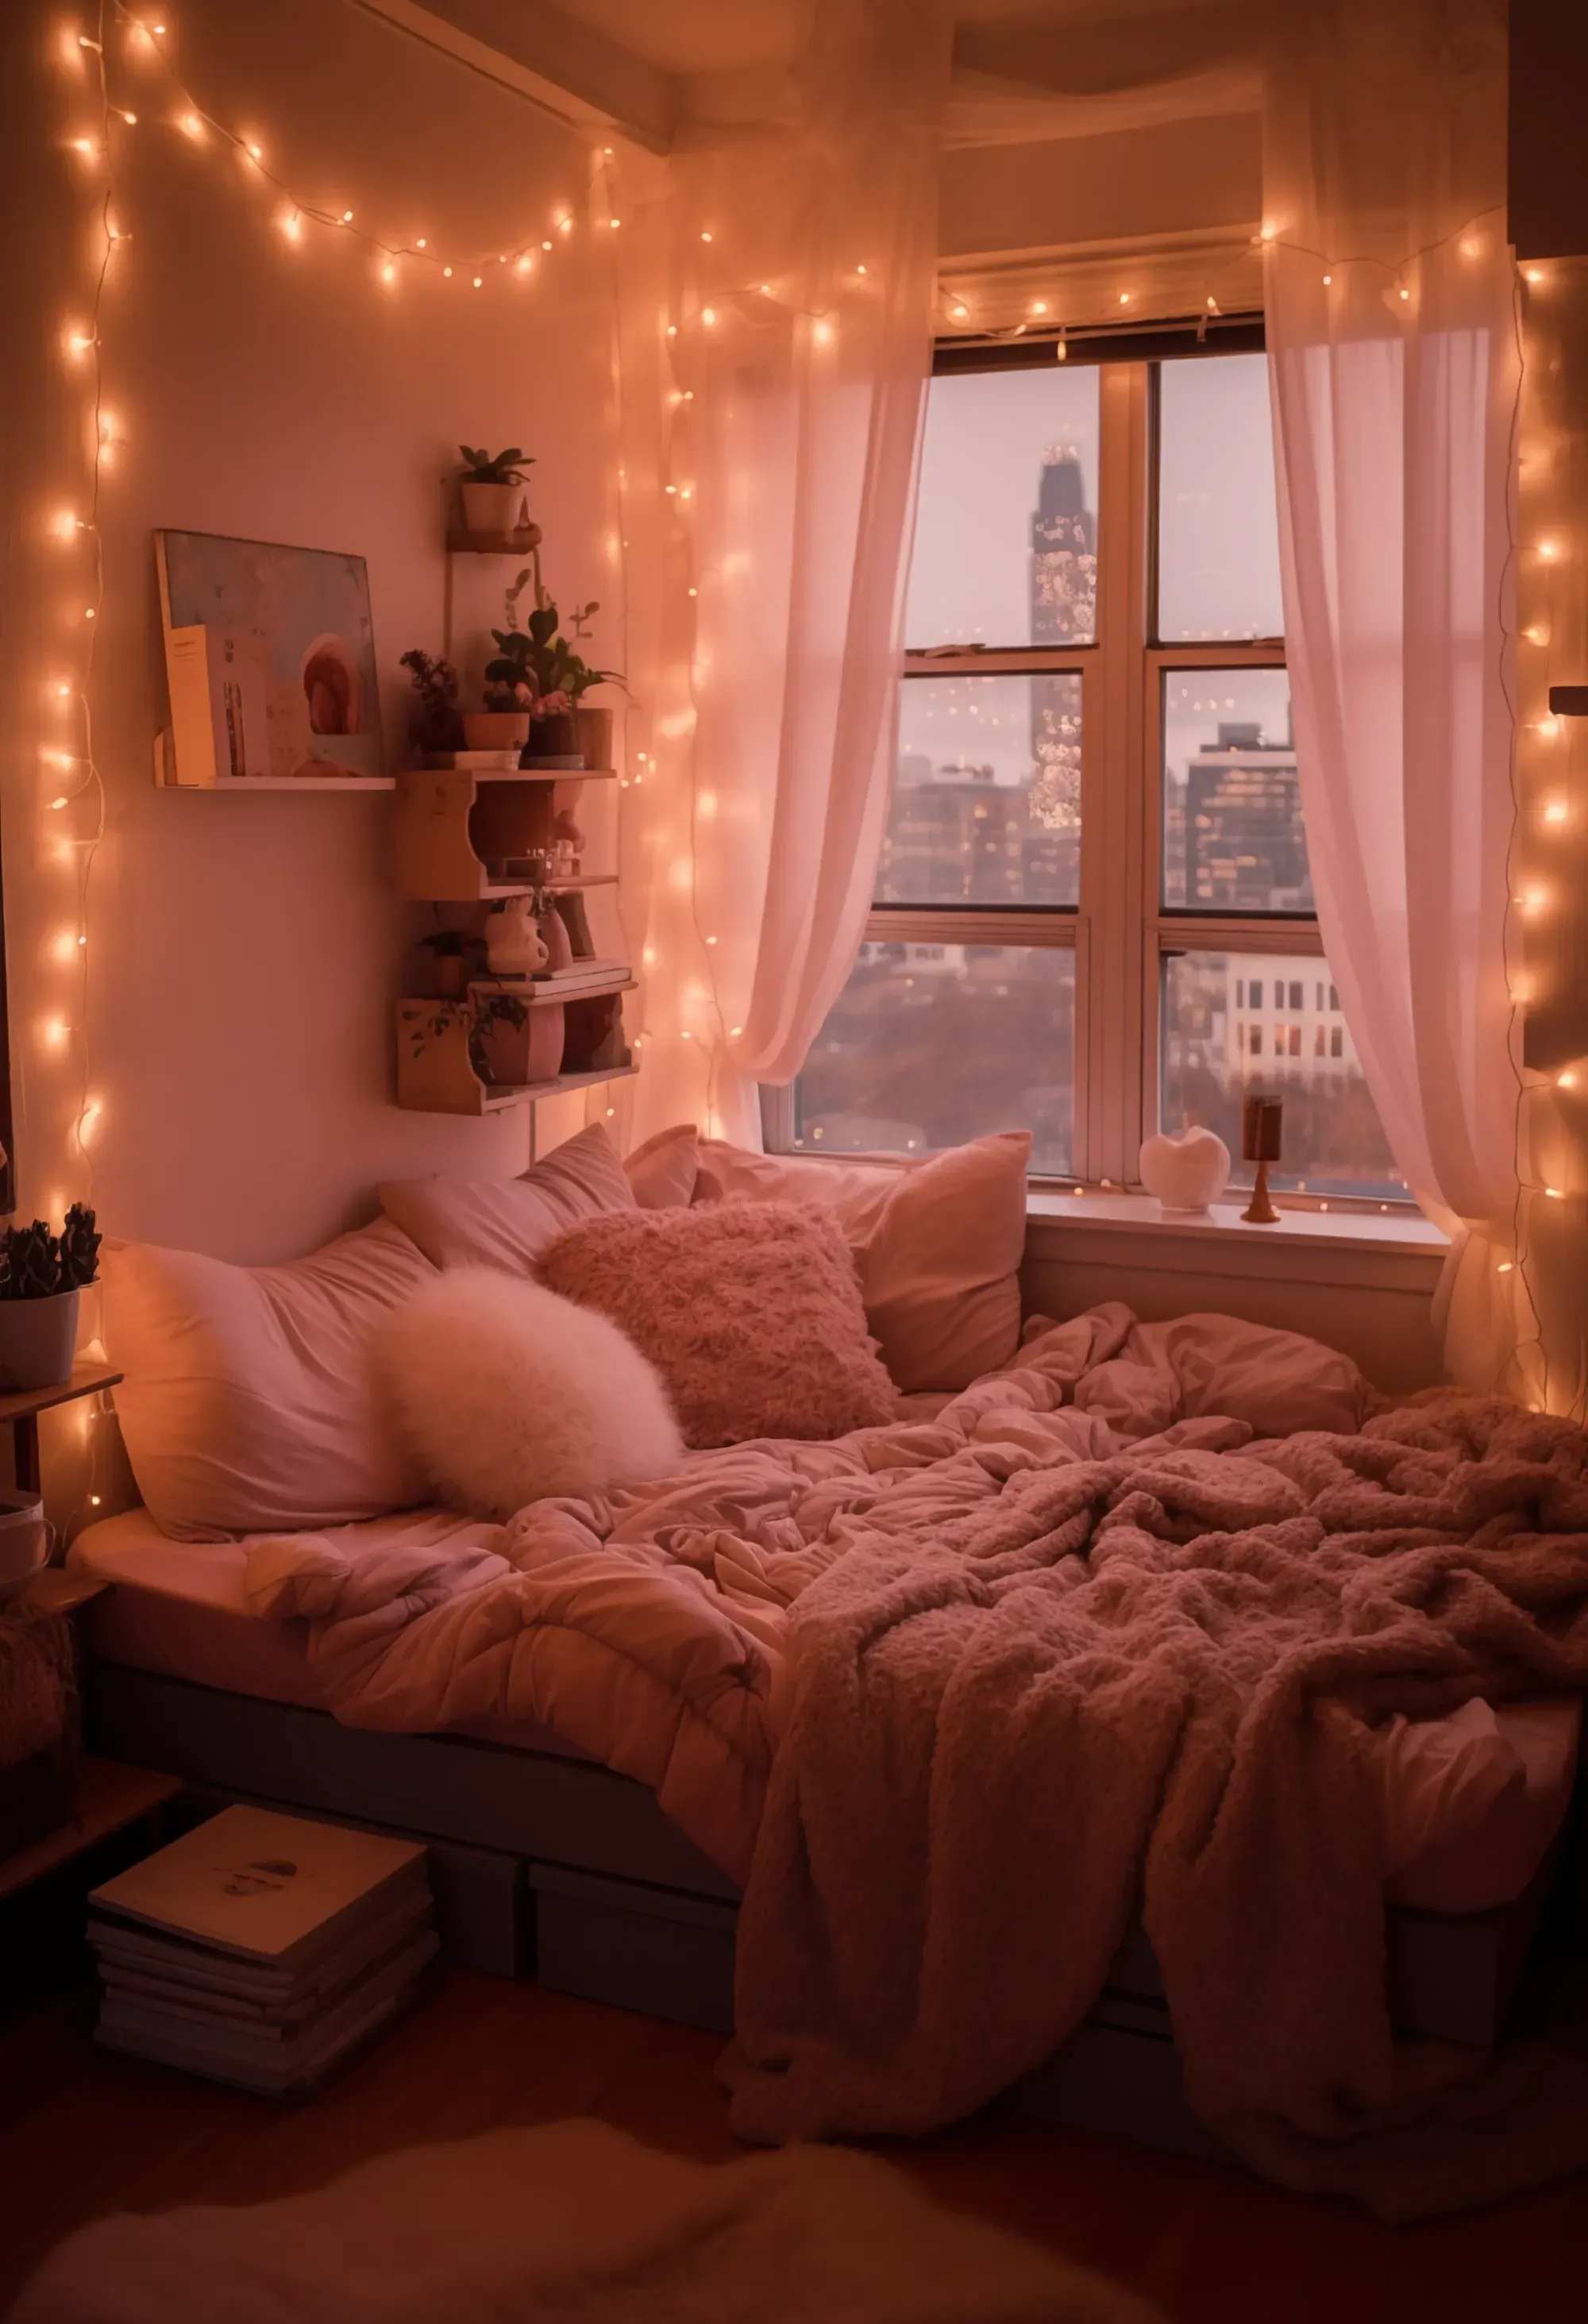 An orange and terracotta dorm bedroom with fairy lights